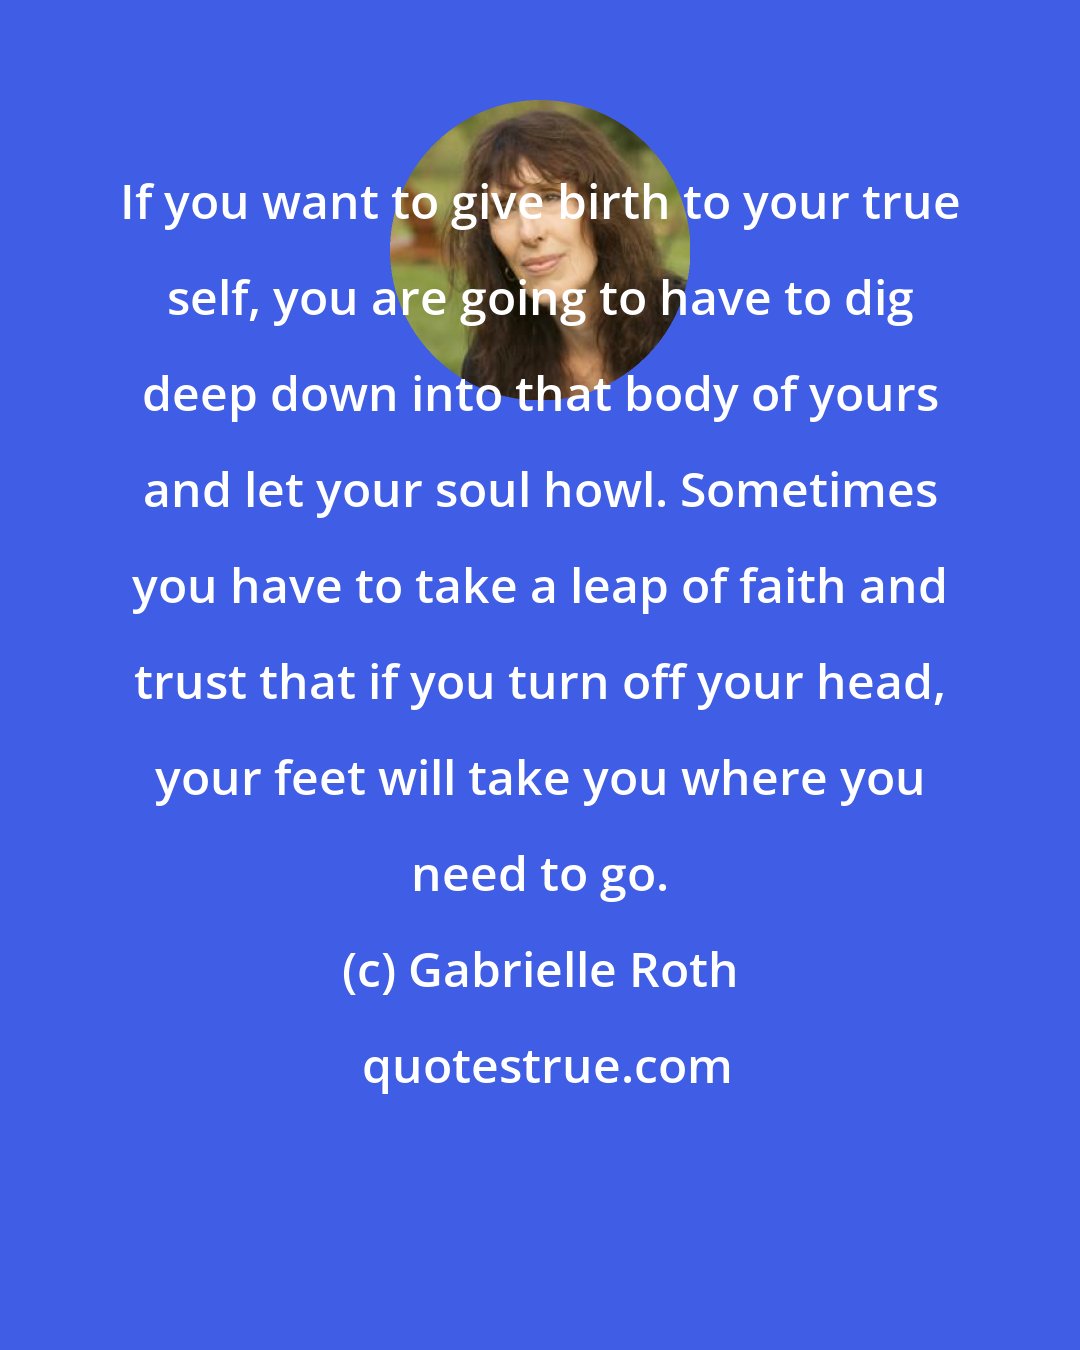 Gabrielle Roth: If you want to give birth to your true self, you are going to have to dig deep down into that body of yours and let your soul howl. Sometimes you have to take a leap of faith and trust that if you turn off your head, your feet will take you where you need to go.